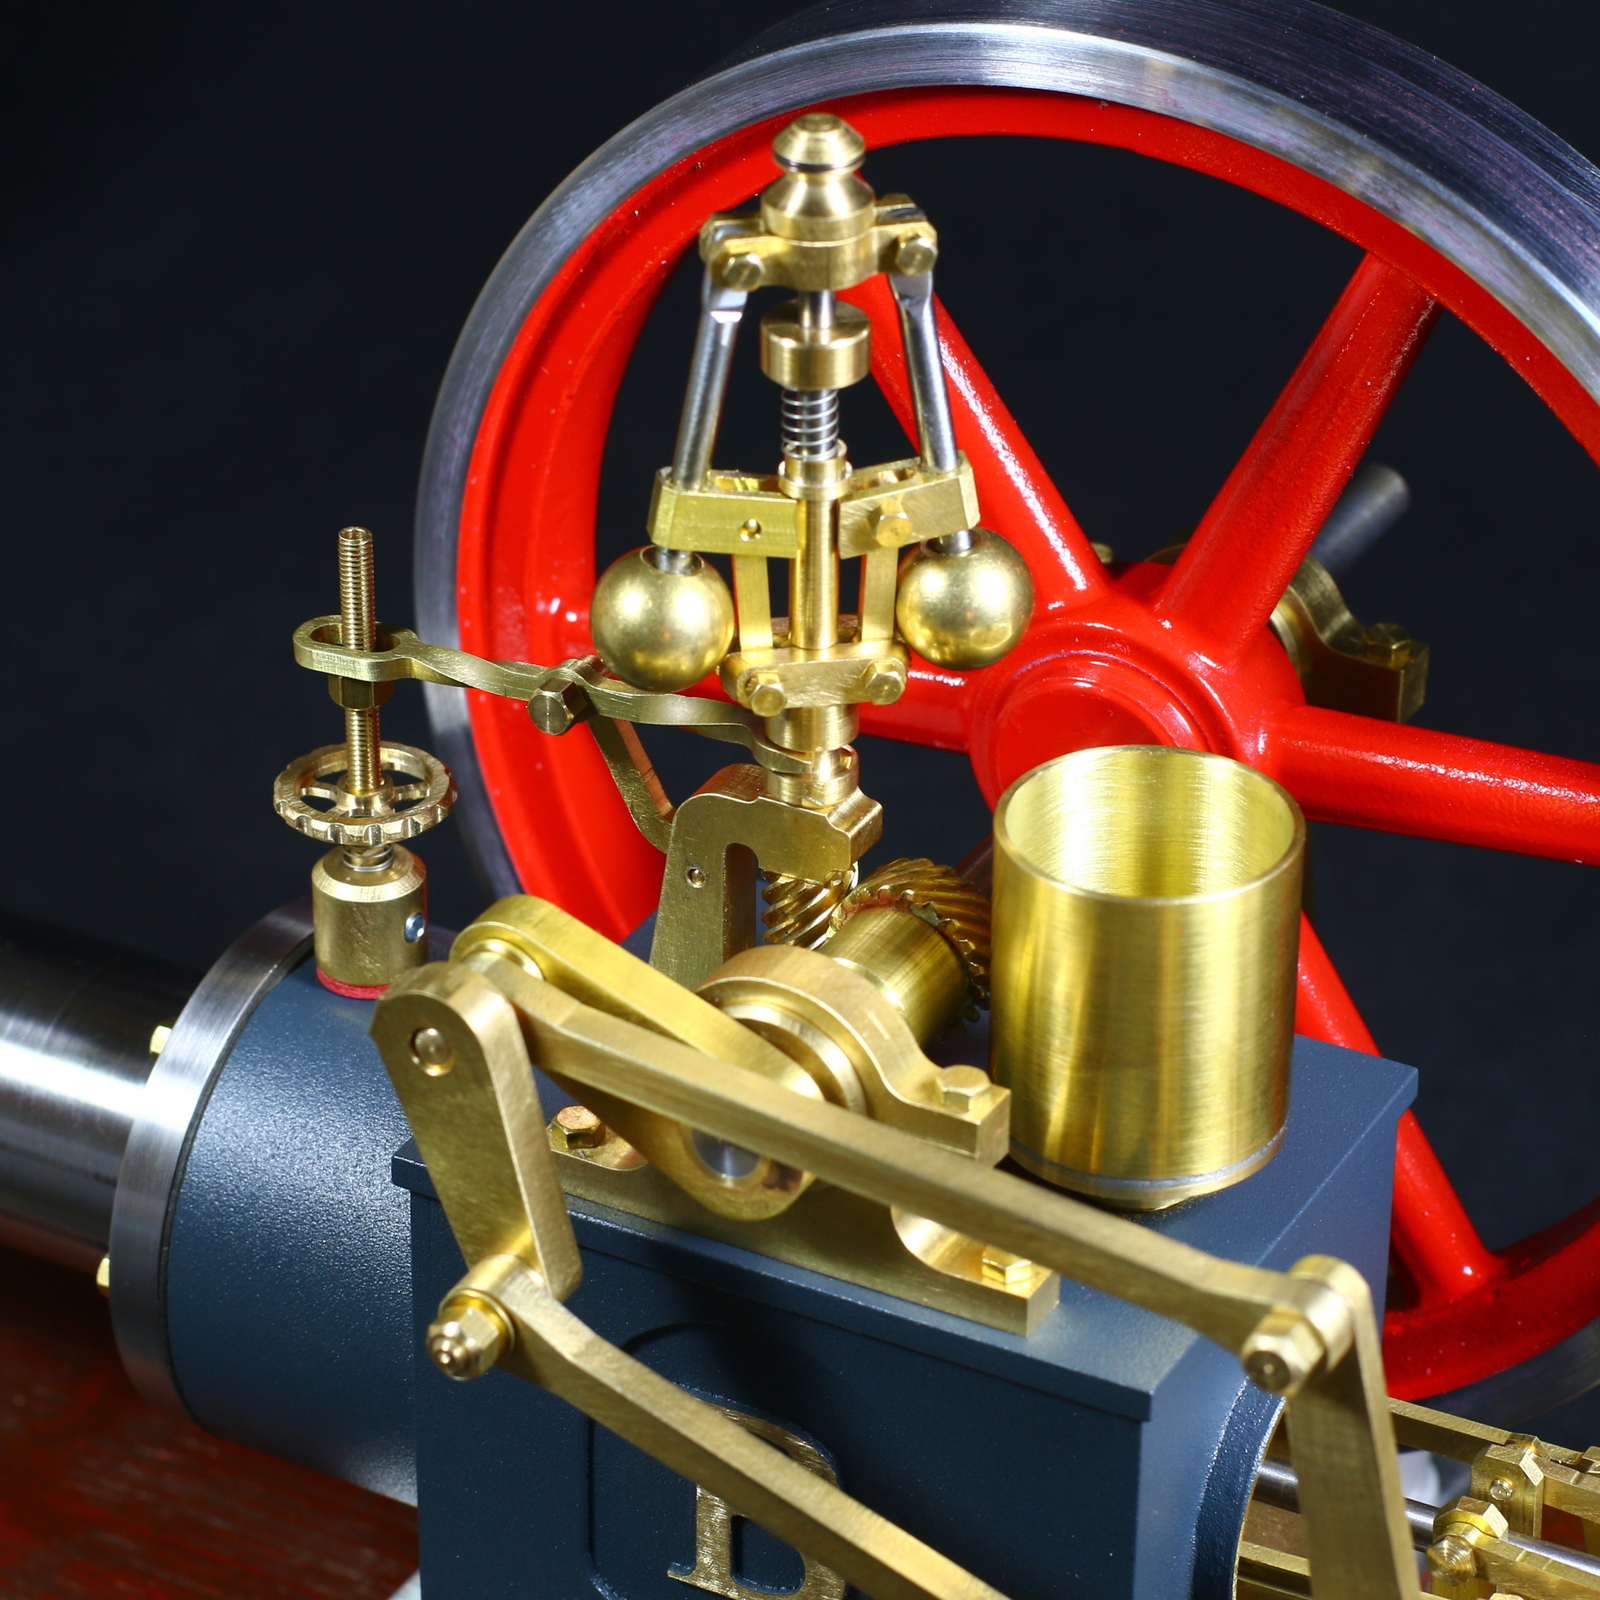 Stirling engine Rainer with centrifugal governor material kit